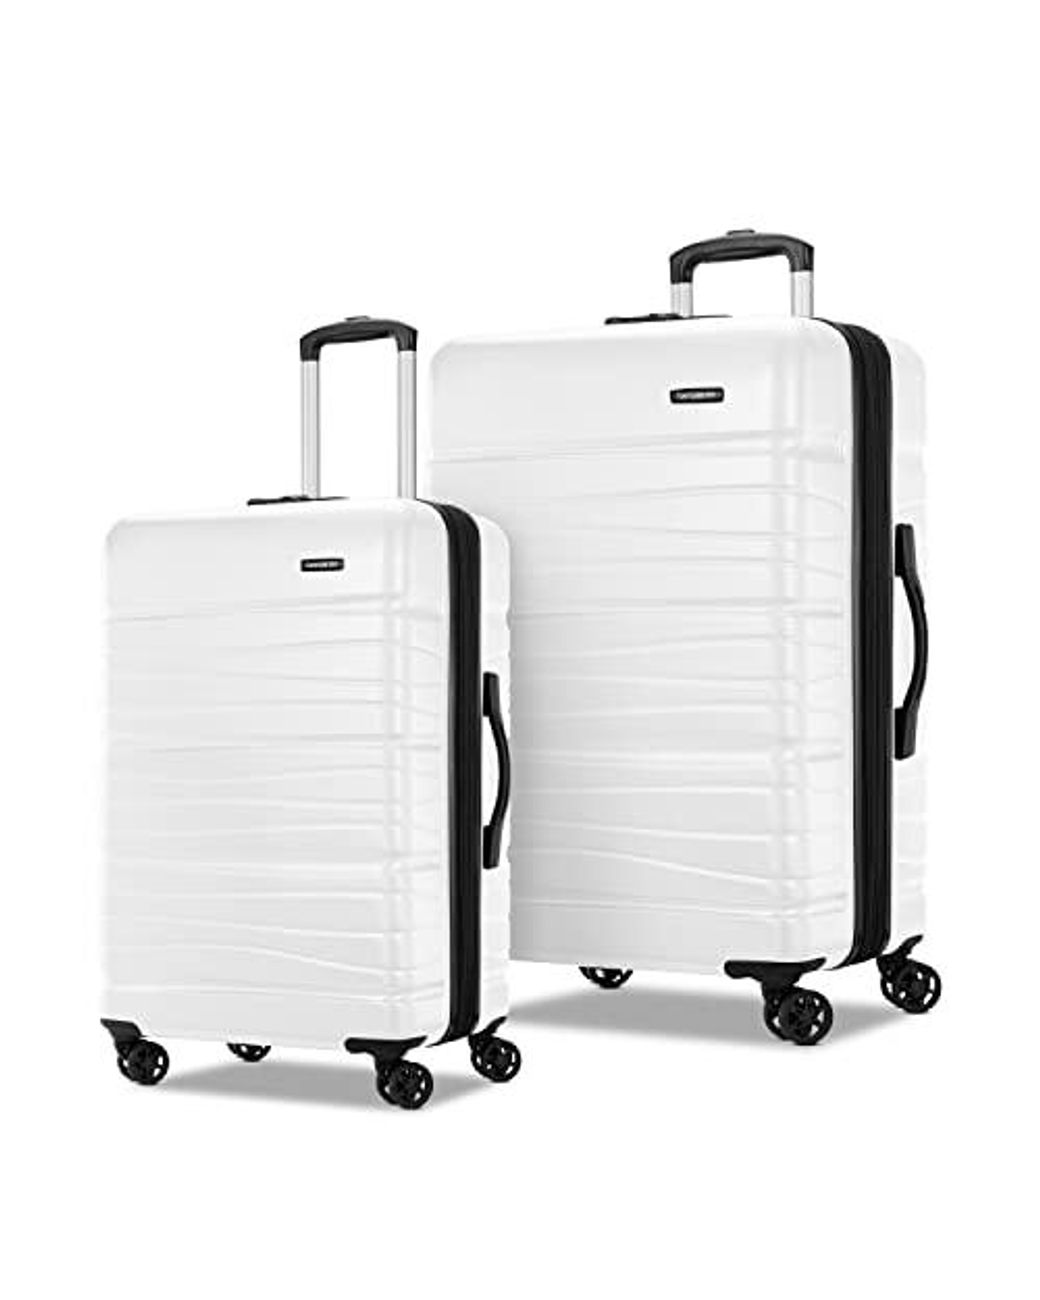 Samsonite Evolve Se Hardside Expandable Luggage With Spinners Snow